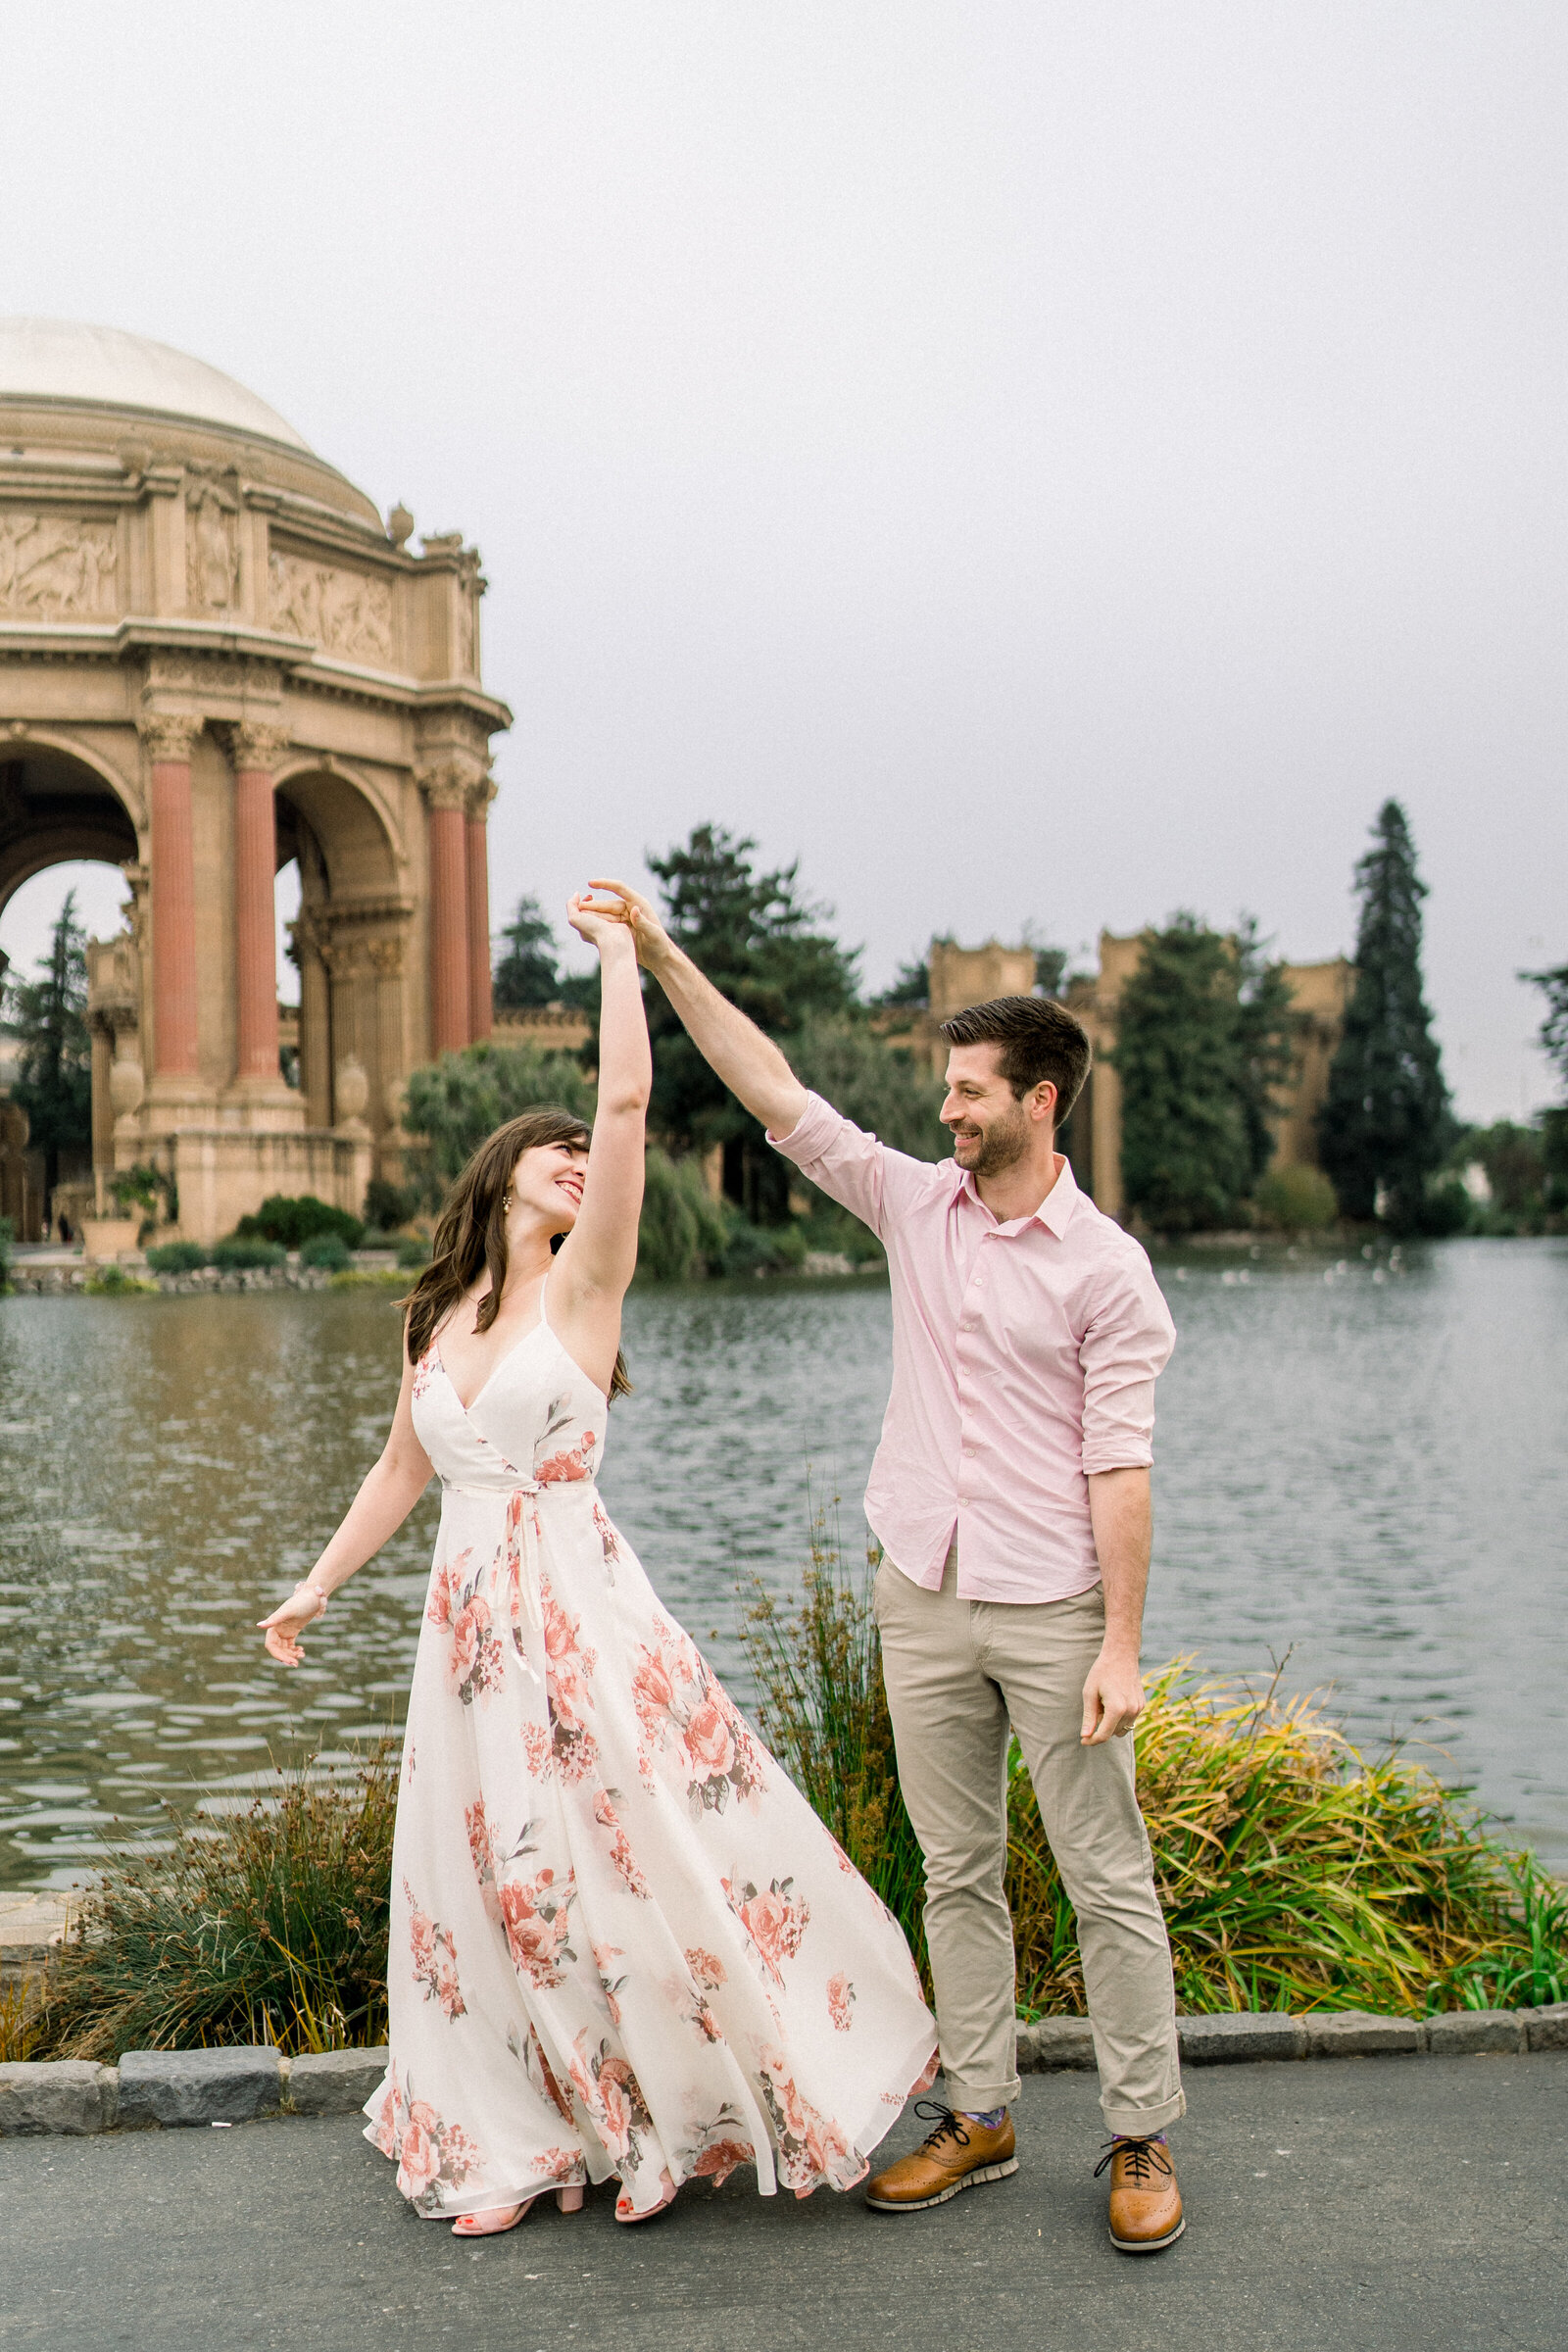 Couples engagement photos at Palace of Fine Arts in San Francisco, CA